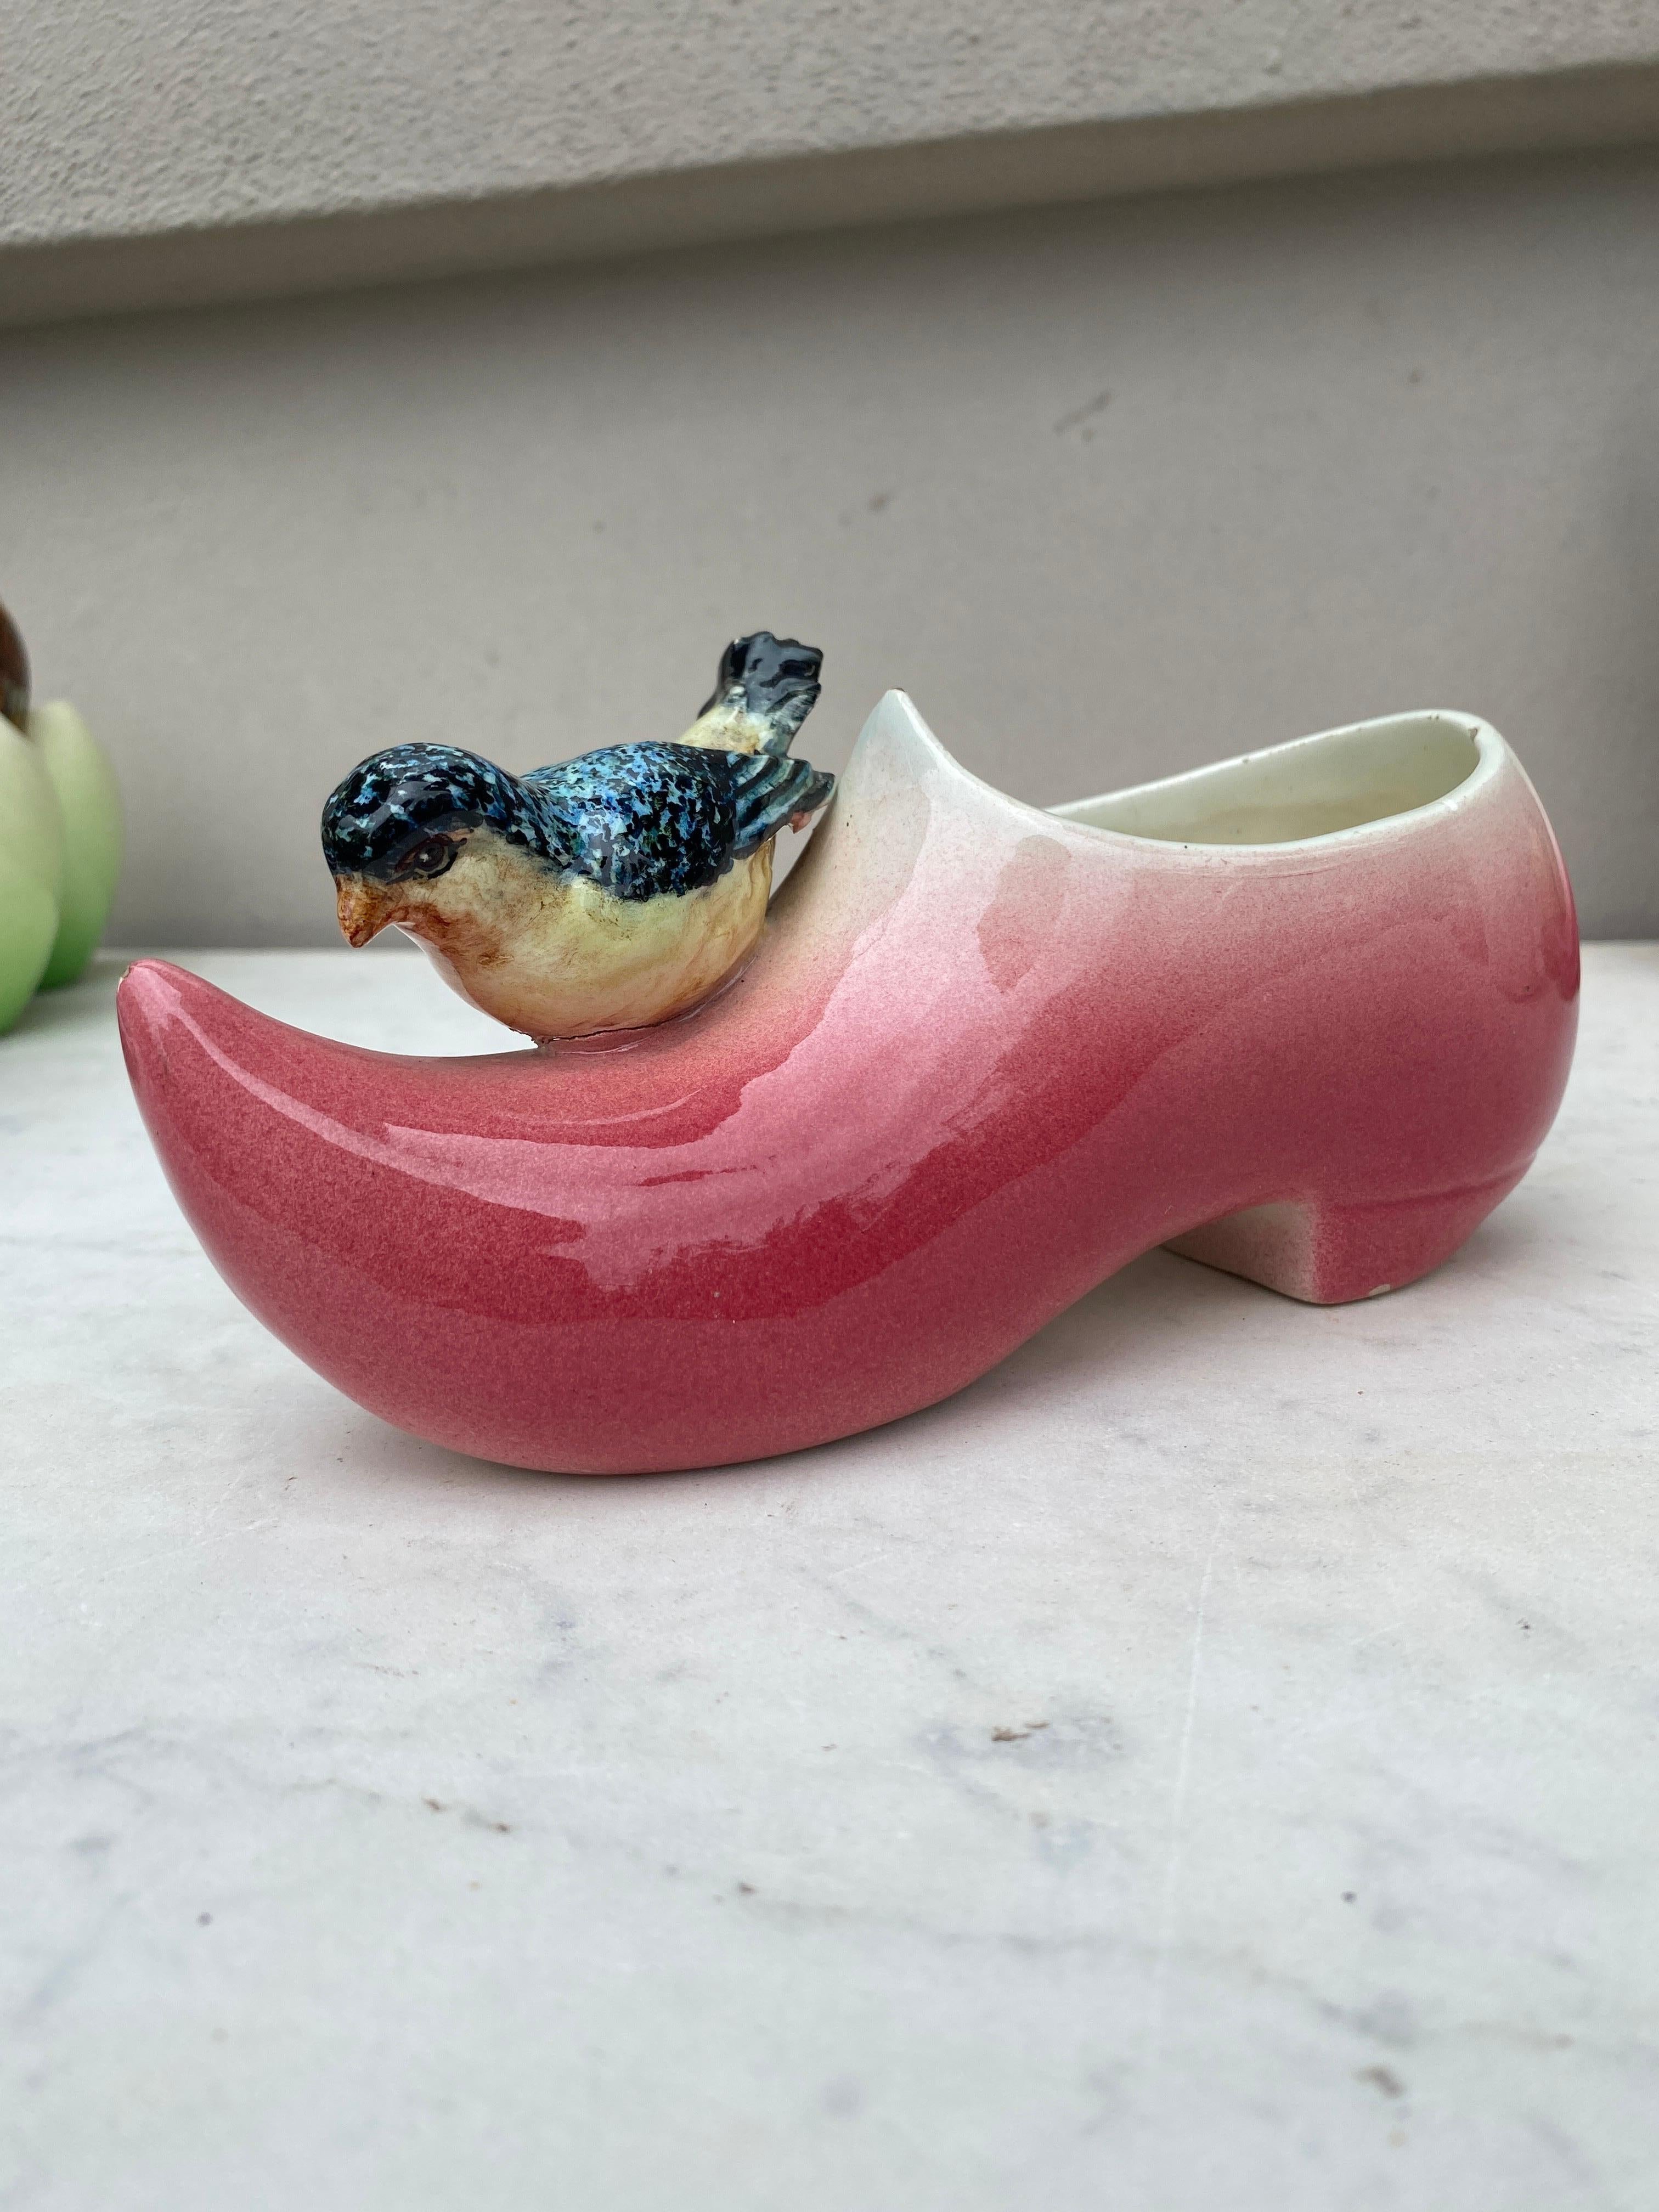 Charming Majolica pink clog with a bird Delphin Massier circa 1890.
H / 3.5 inches , L / 7 inches.
The Massier family produced different pieces with birds in a very creative style in Vallauris on the French Riviera, they excelled in the